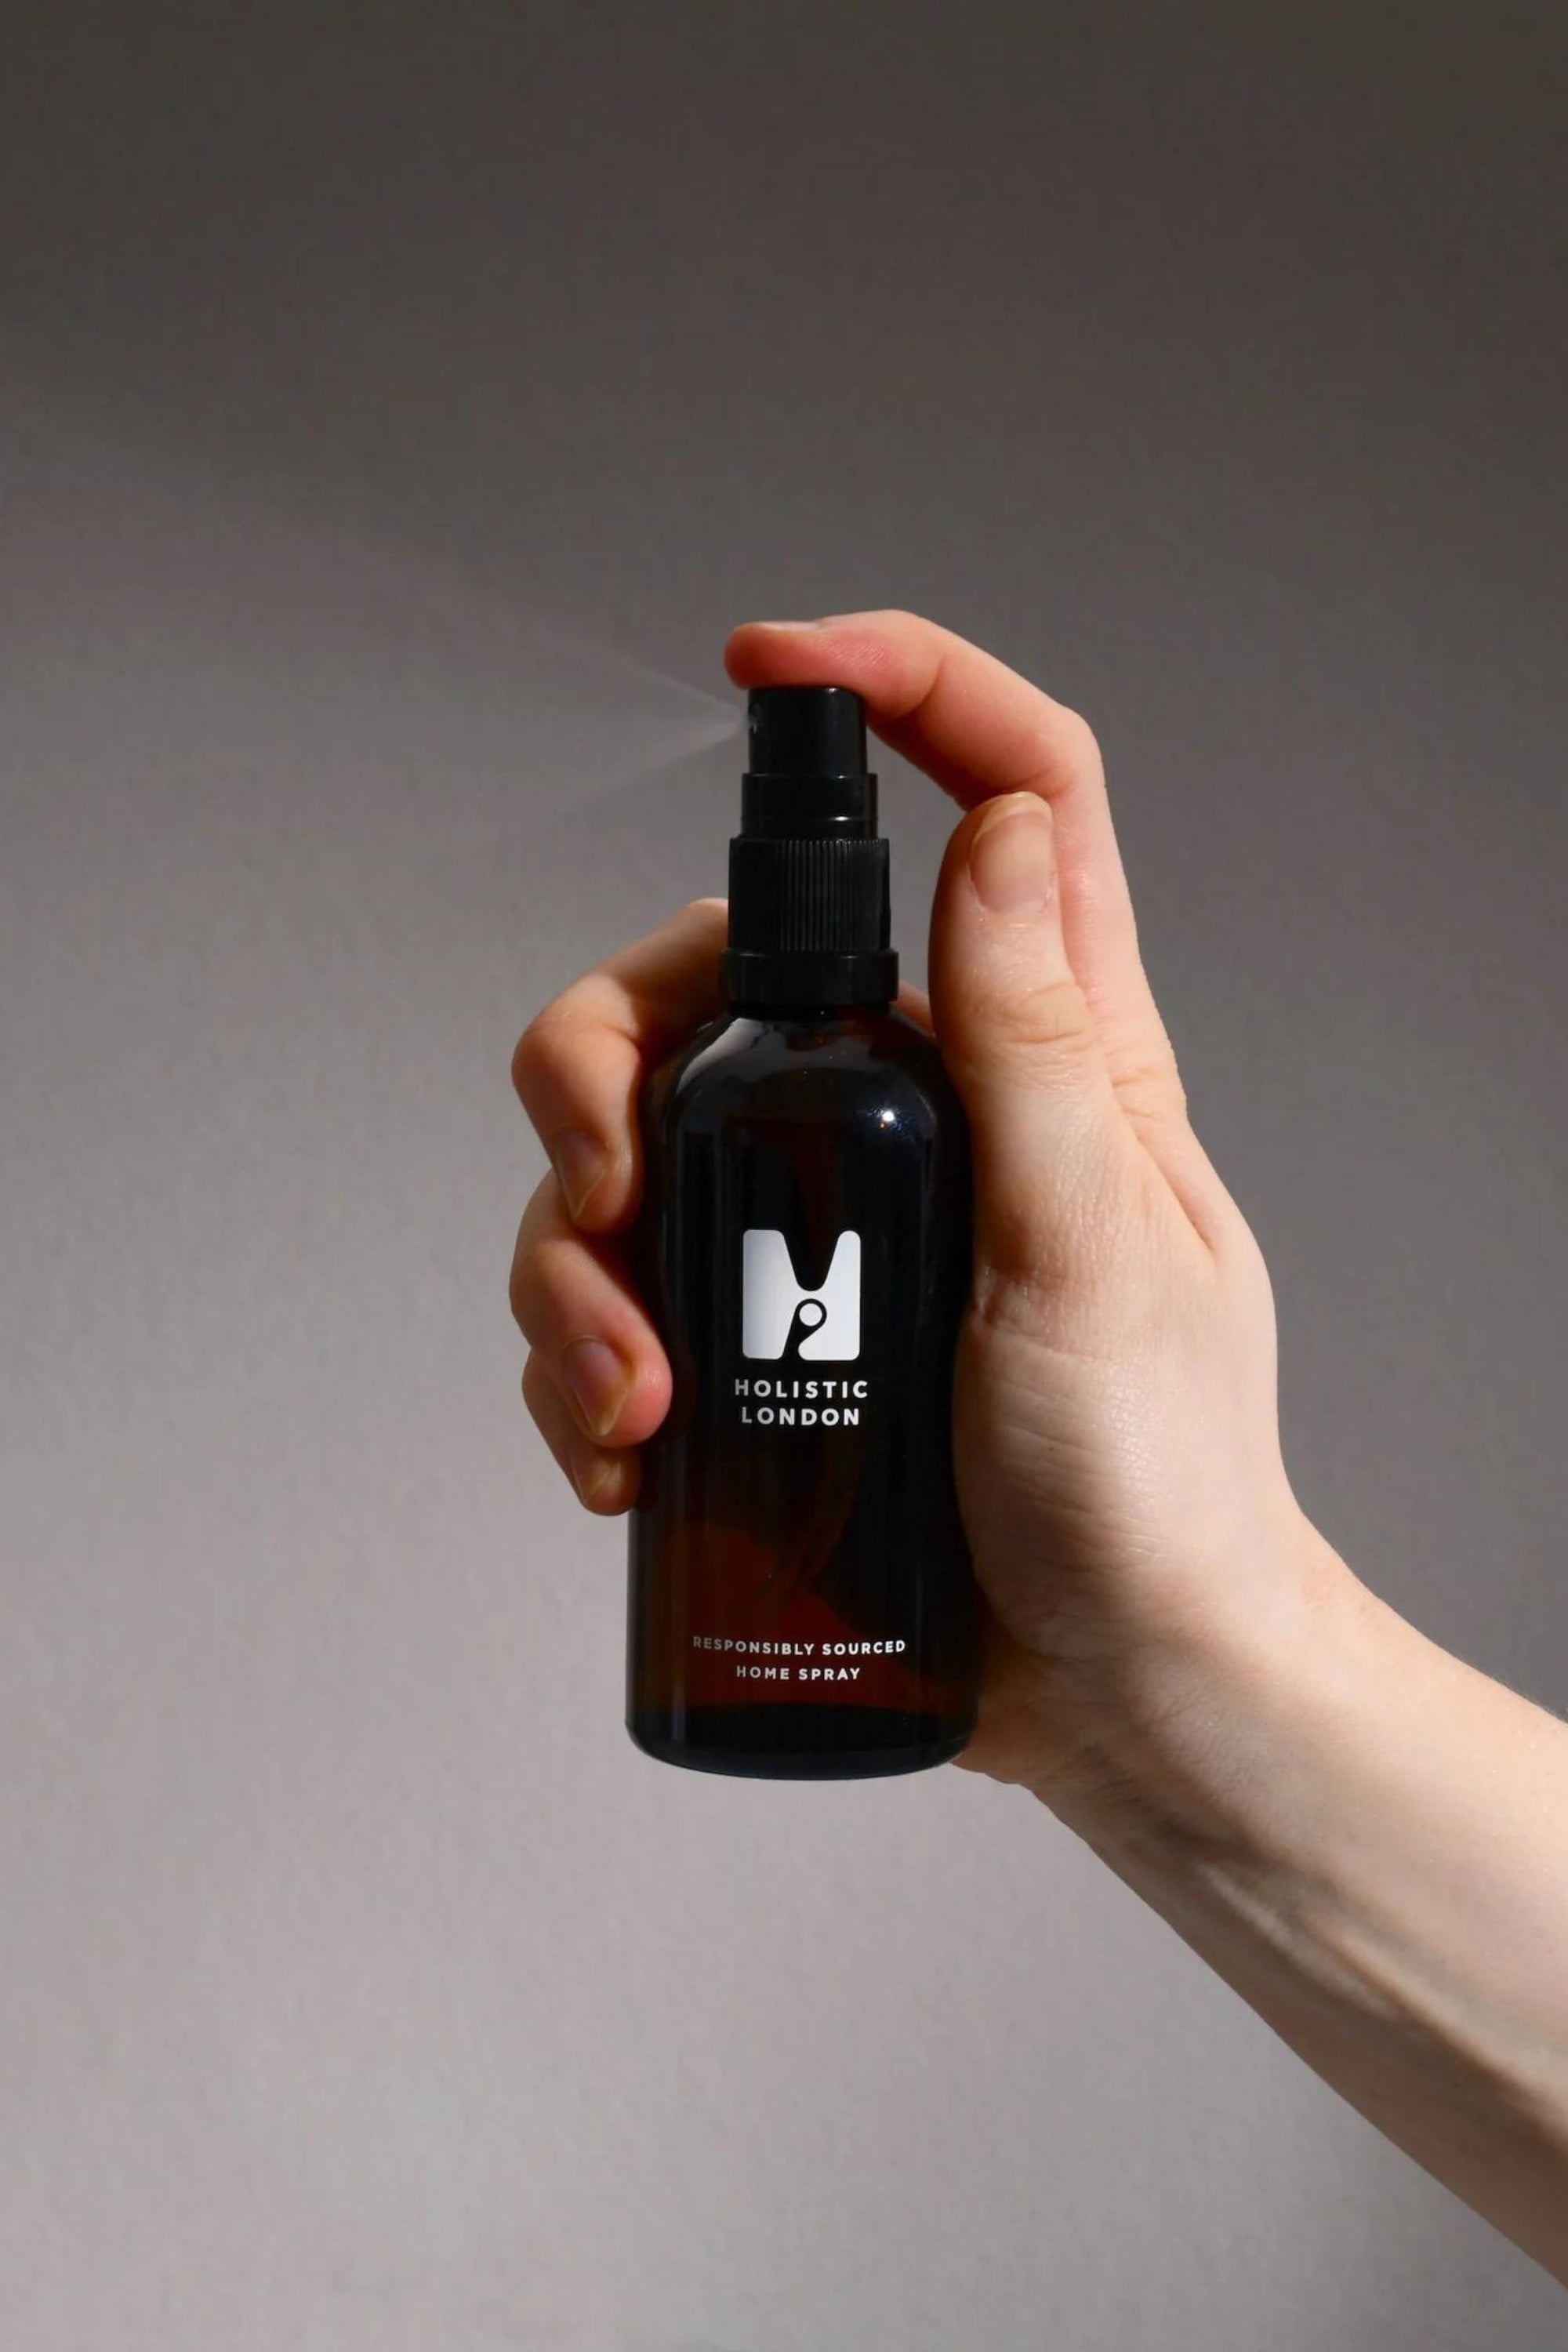 Vegan & cruelty-free room spray with 100% essential oils blend from responsibly sourced ingredients to help relax, soothe senses, remove toxins and impurities to de-stress the mind with and calm nerves to treat anxiety and insomnia. Neroli and chamomile scent.   